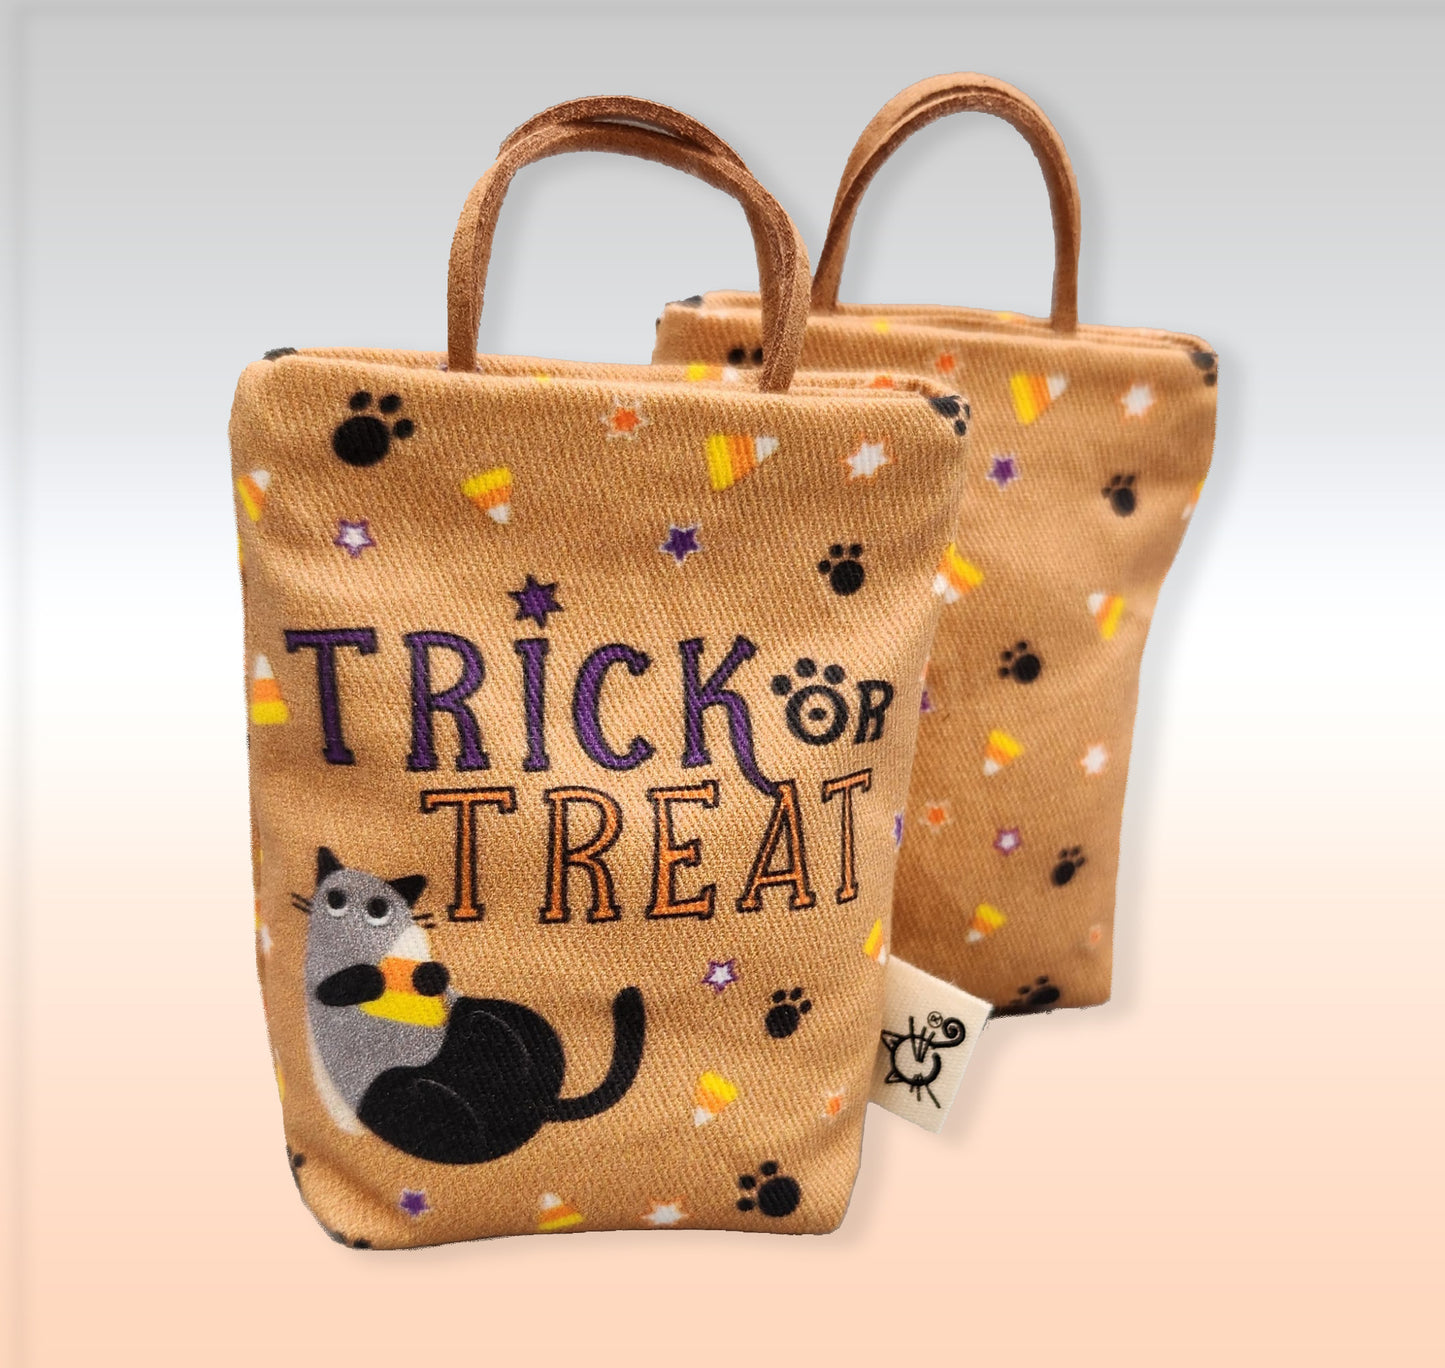 NEW - Refillable Trick or Treat Brown Bag Cat Toy